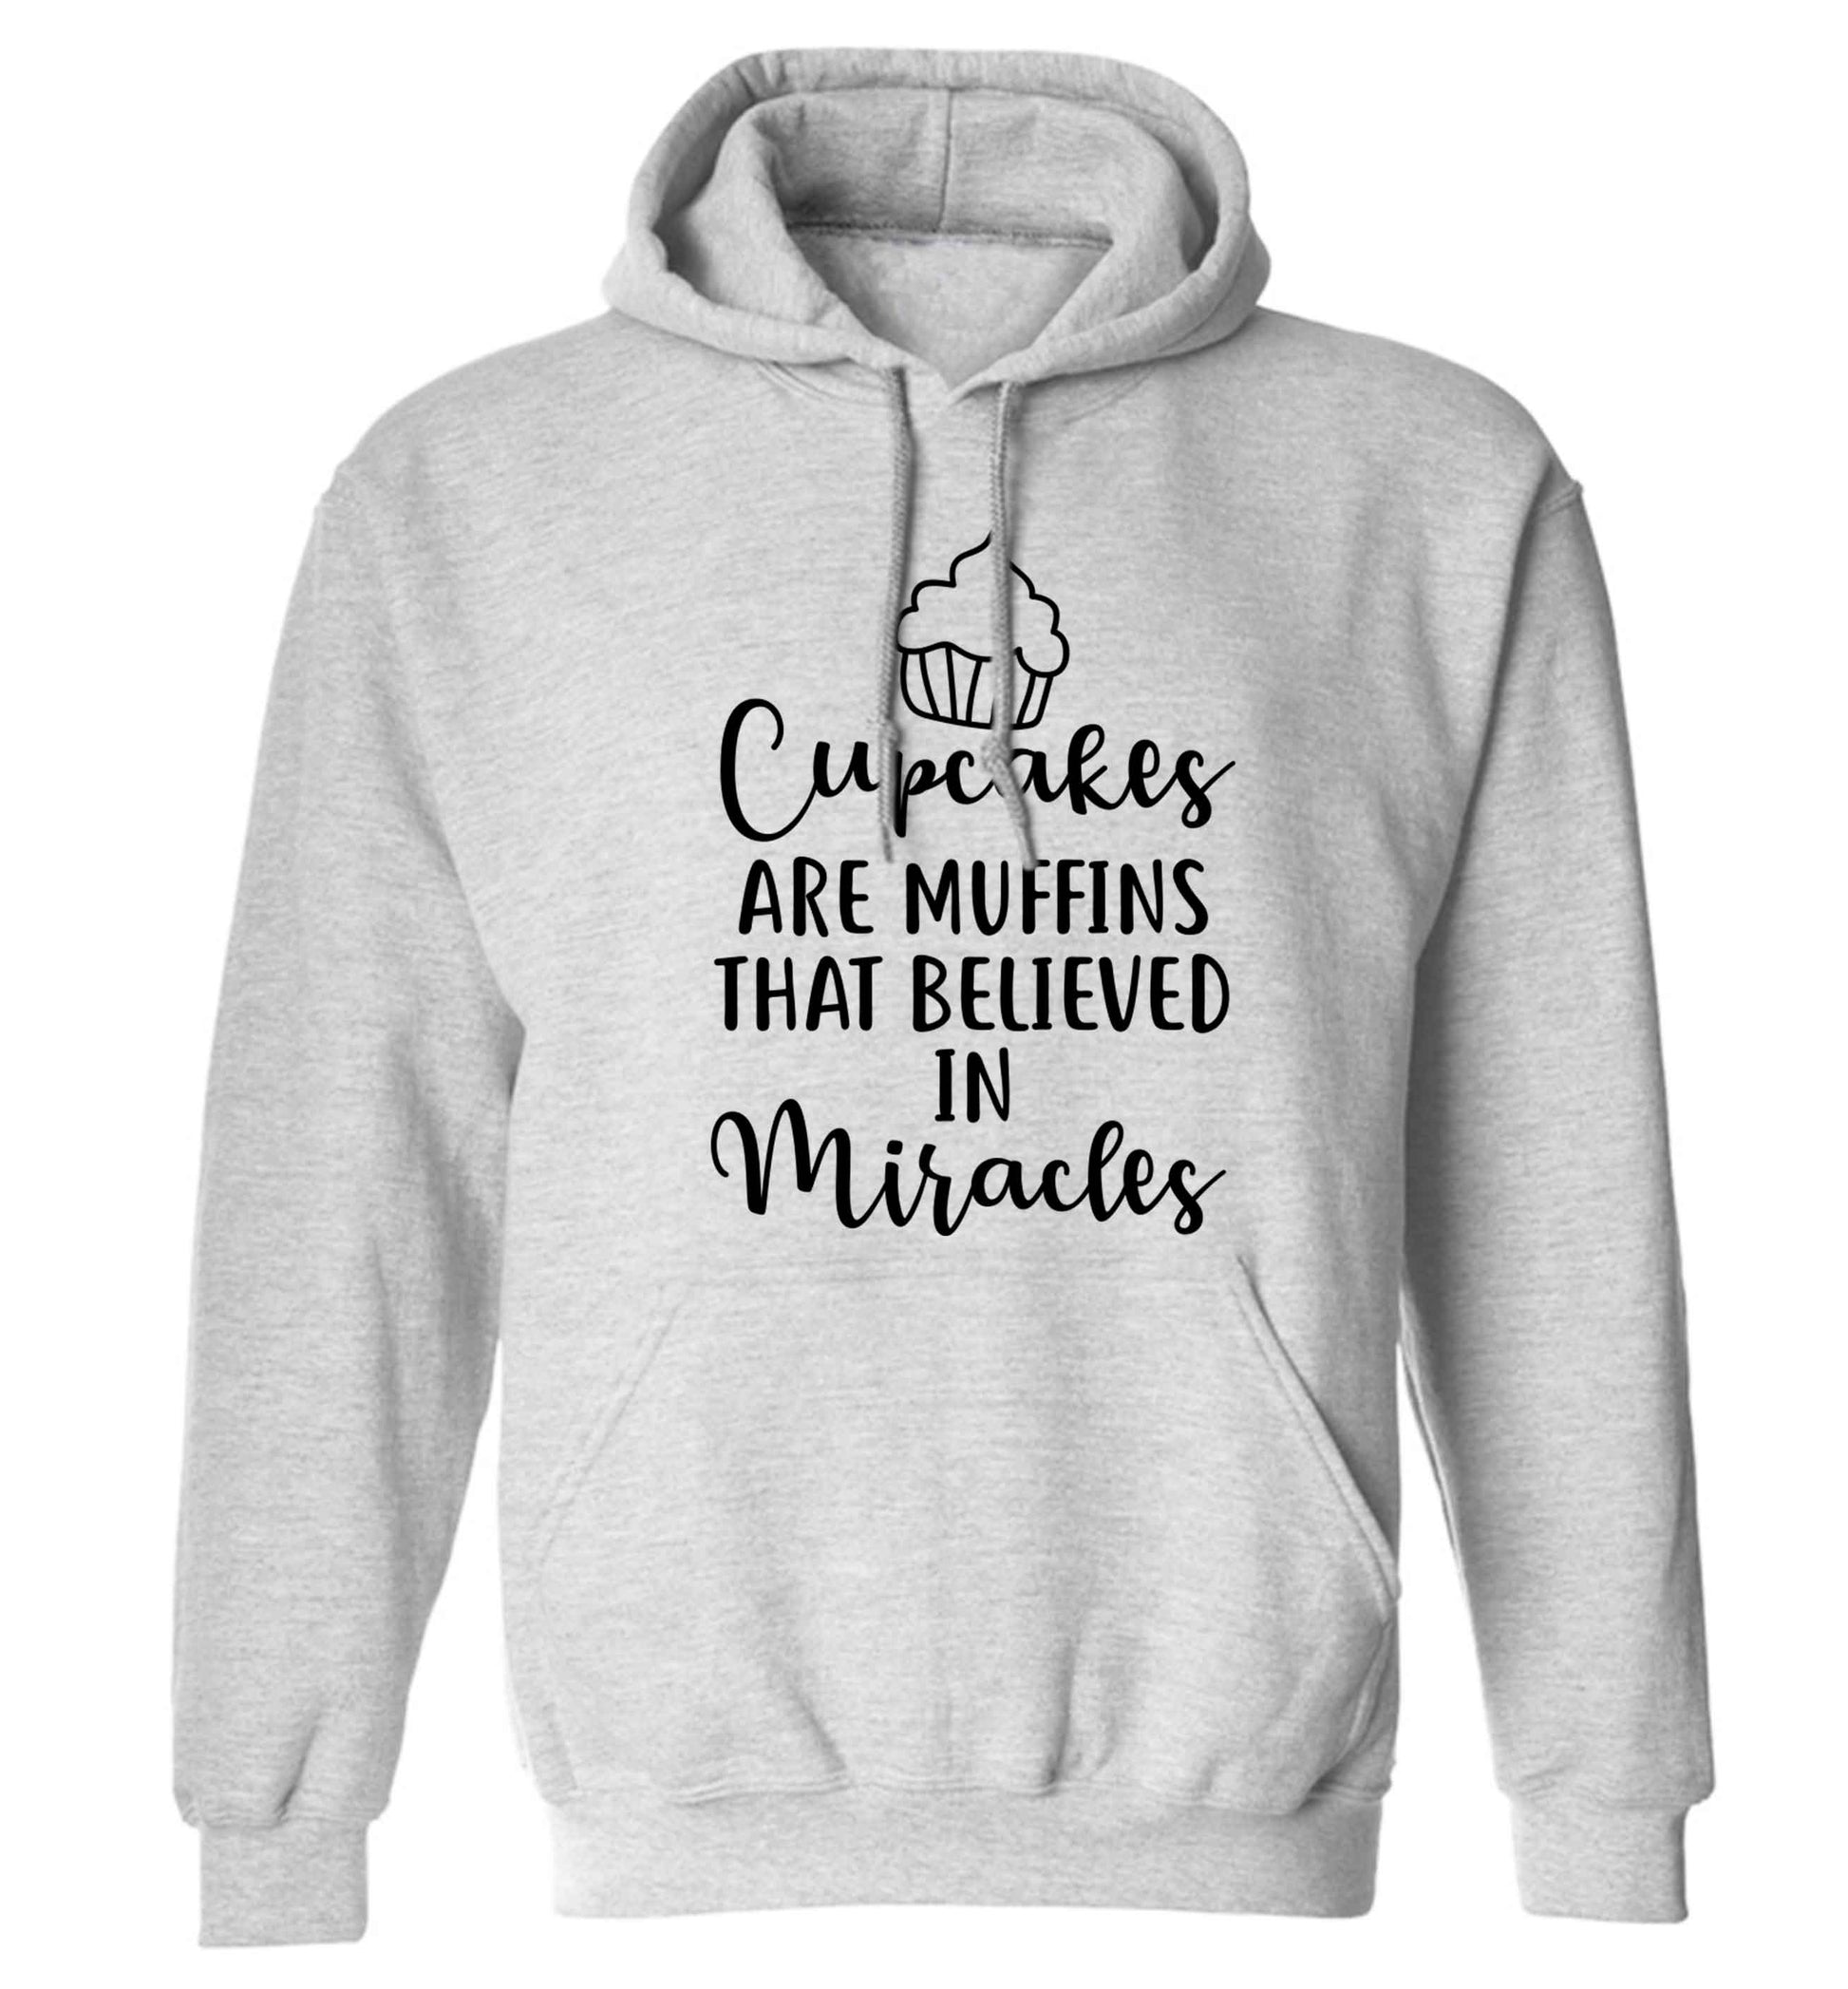 Cupcakes muffins that believed in miracles adults unisex grey hoodie 2XL